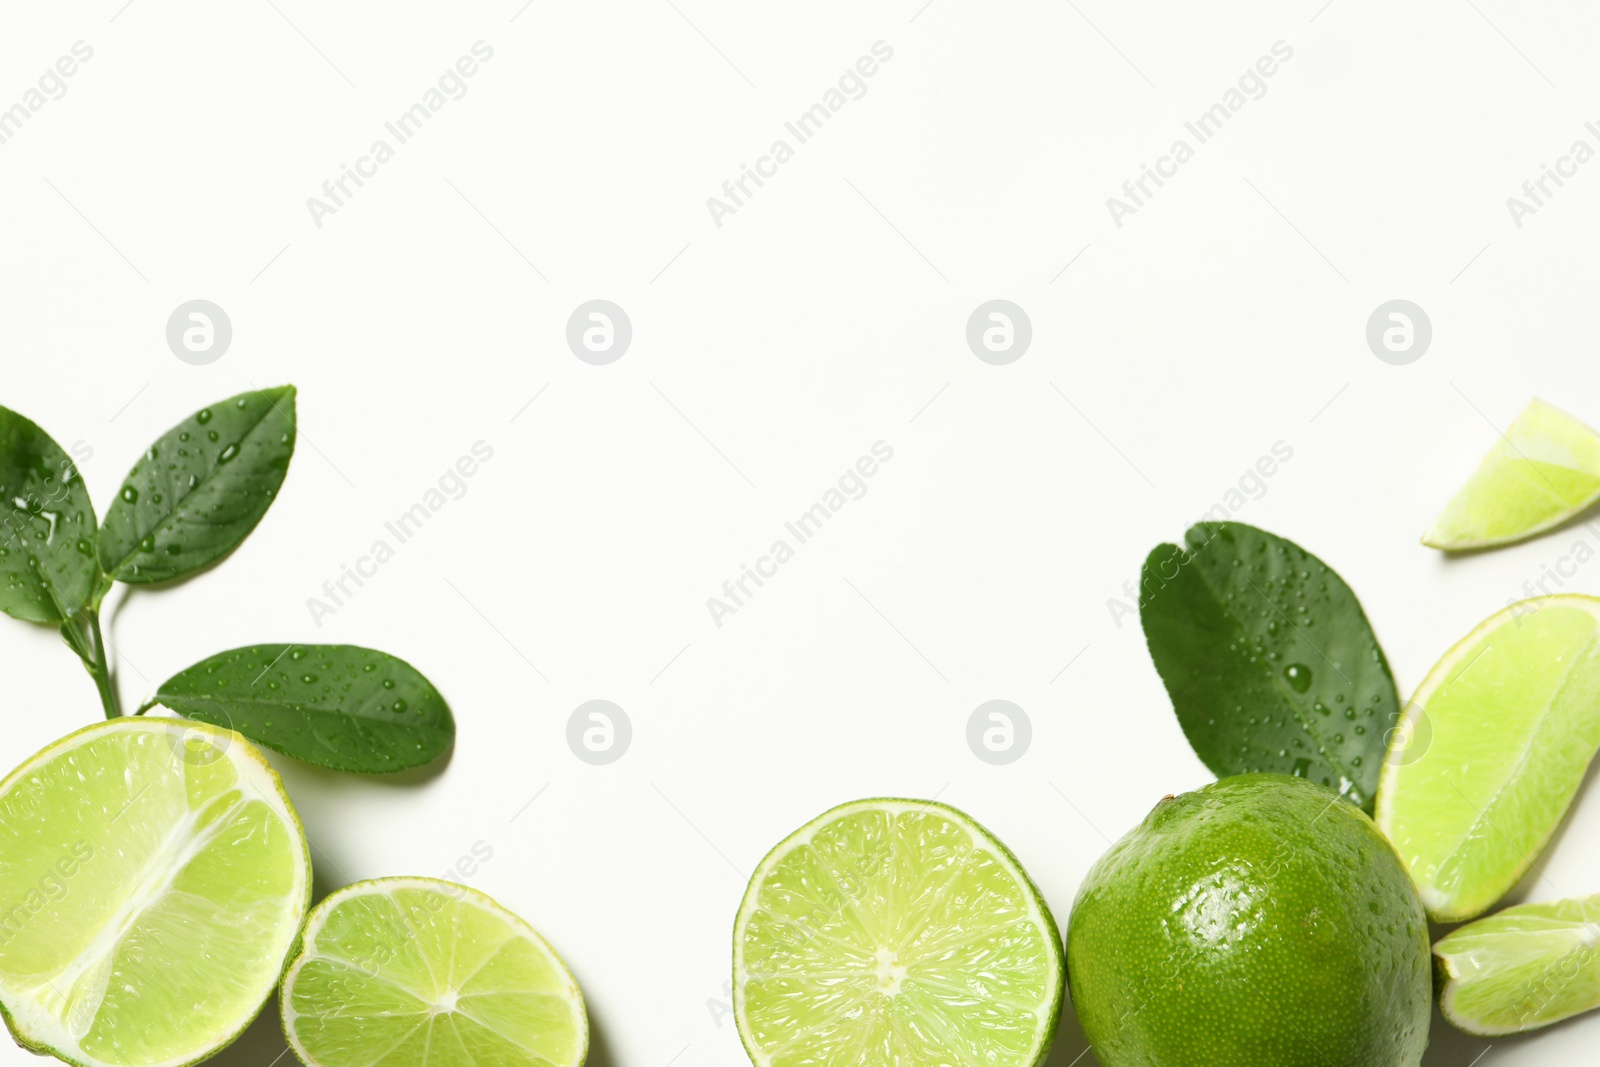 Photo of Whole and cut fresh ripe limes with green leaves on white background, flat lay